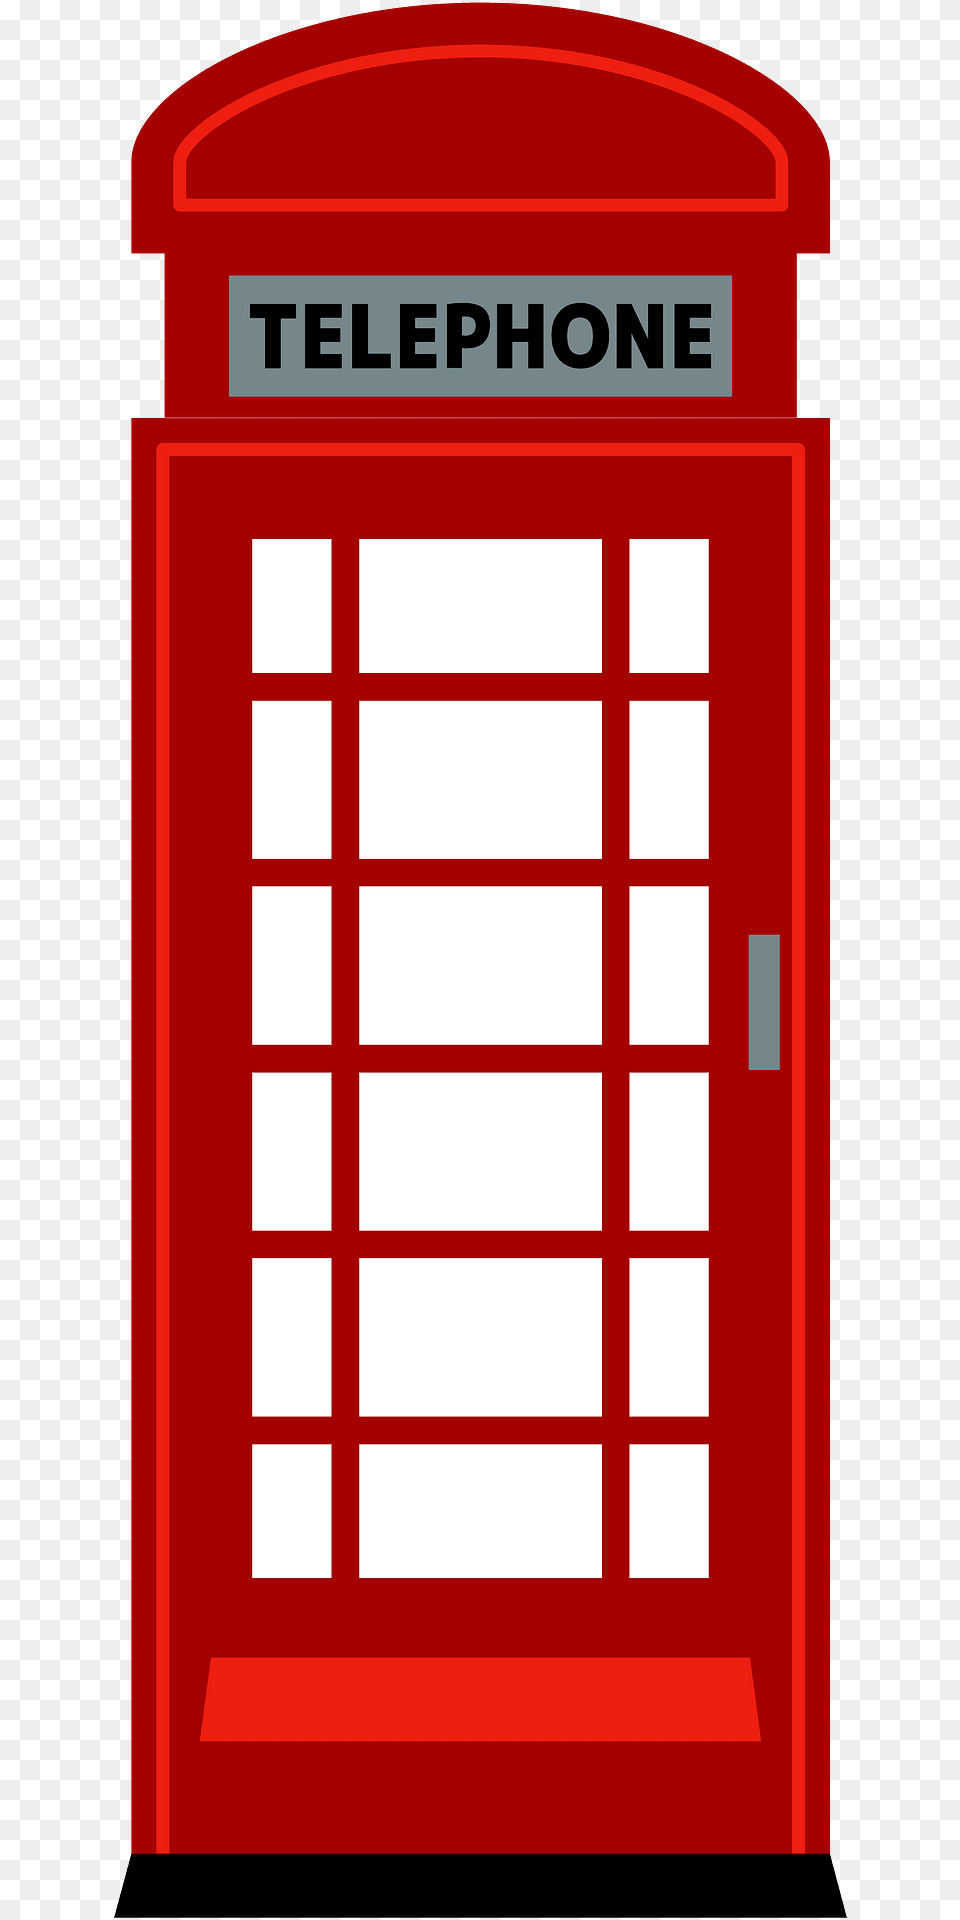 Telephone Booth Clipart, First Aid, Phone Booth, Kiosk Free Transparent Png